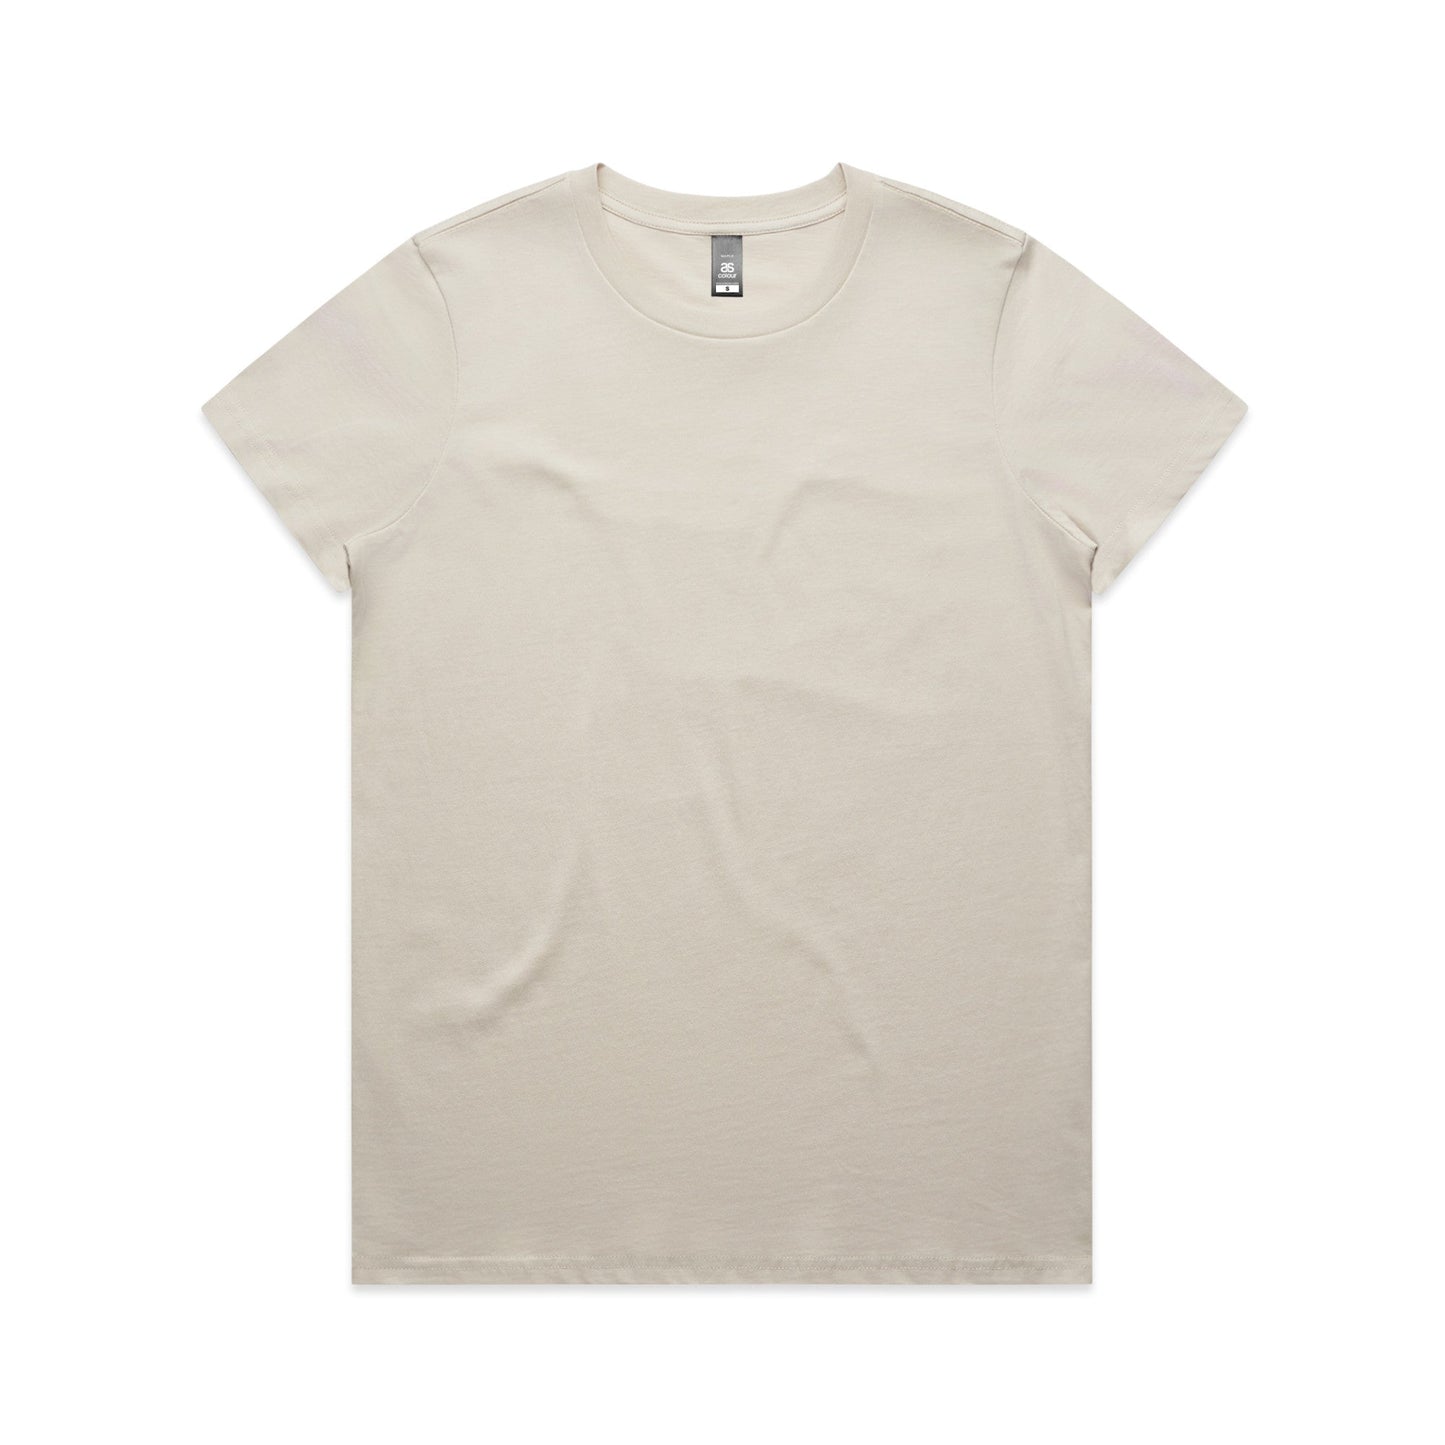 "Not Just Clean Monica Clean" Relaxed Maple T-Shirt